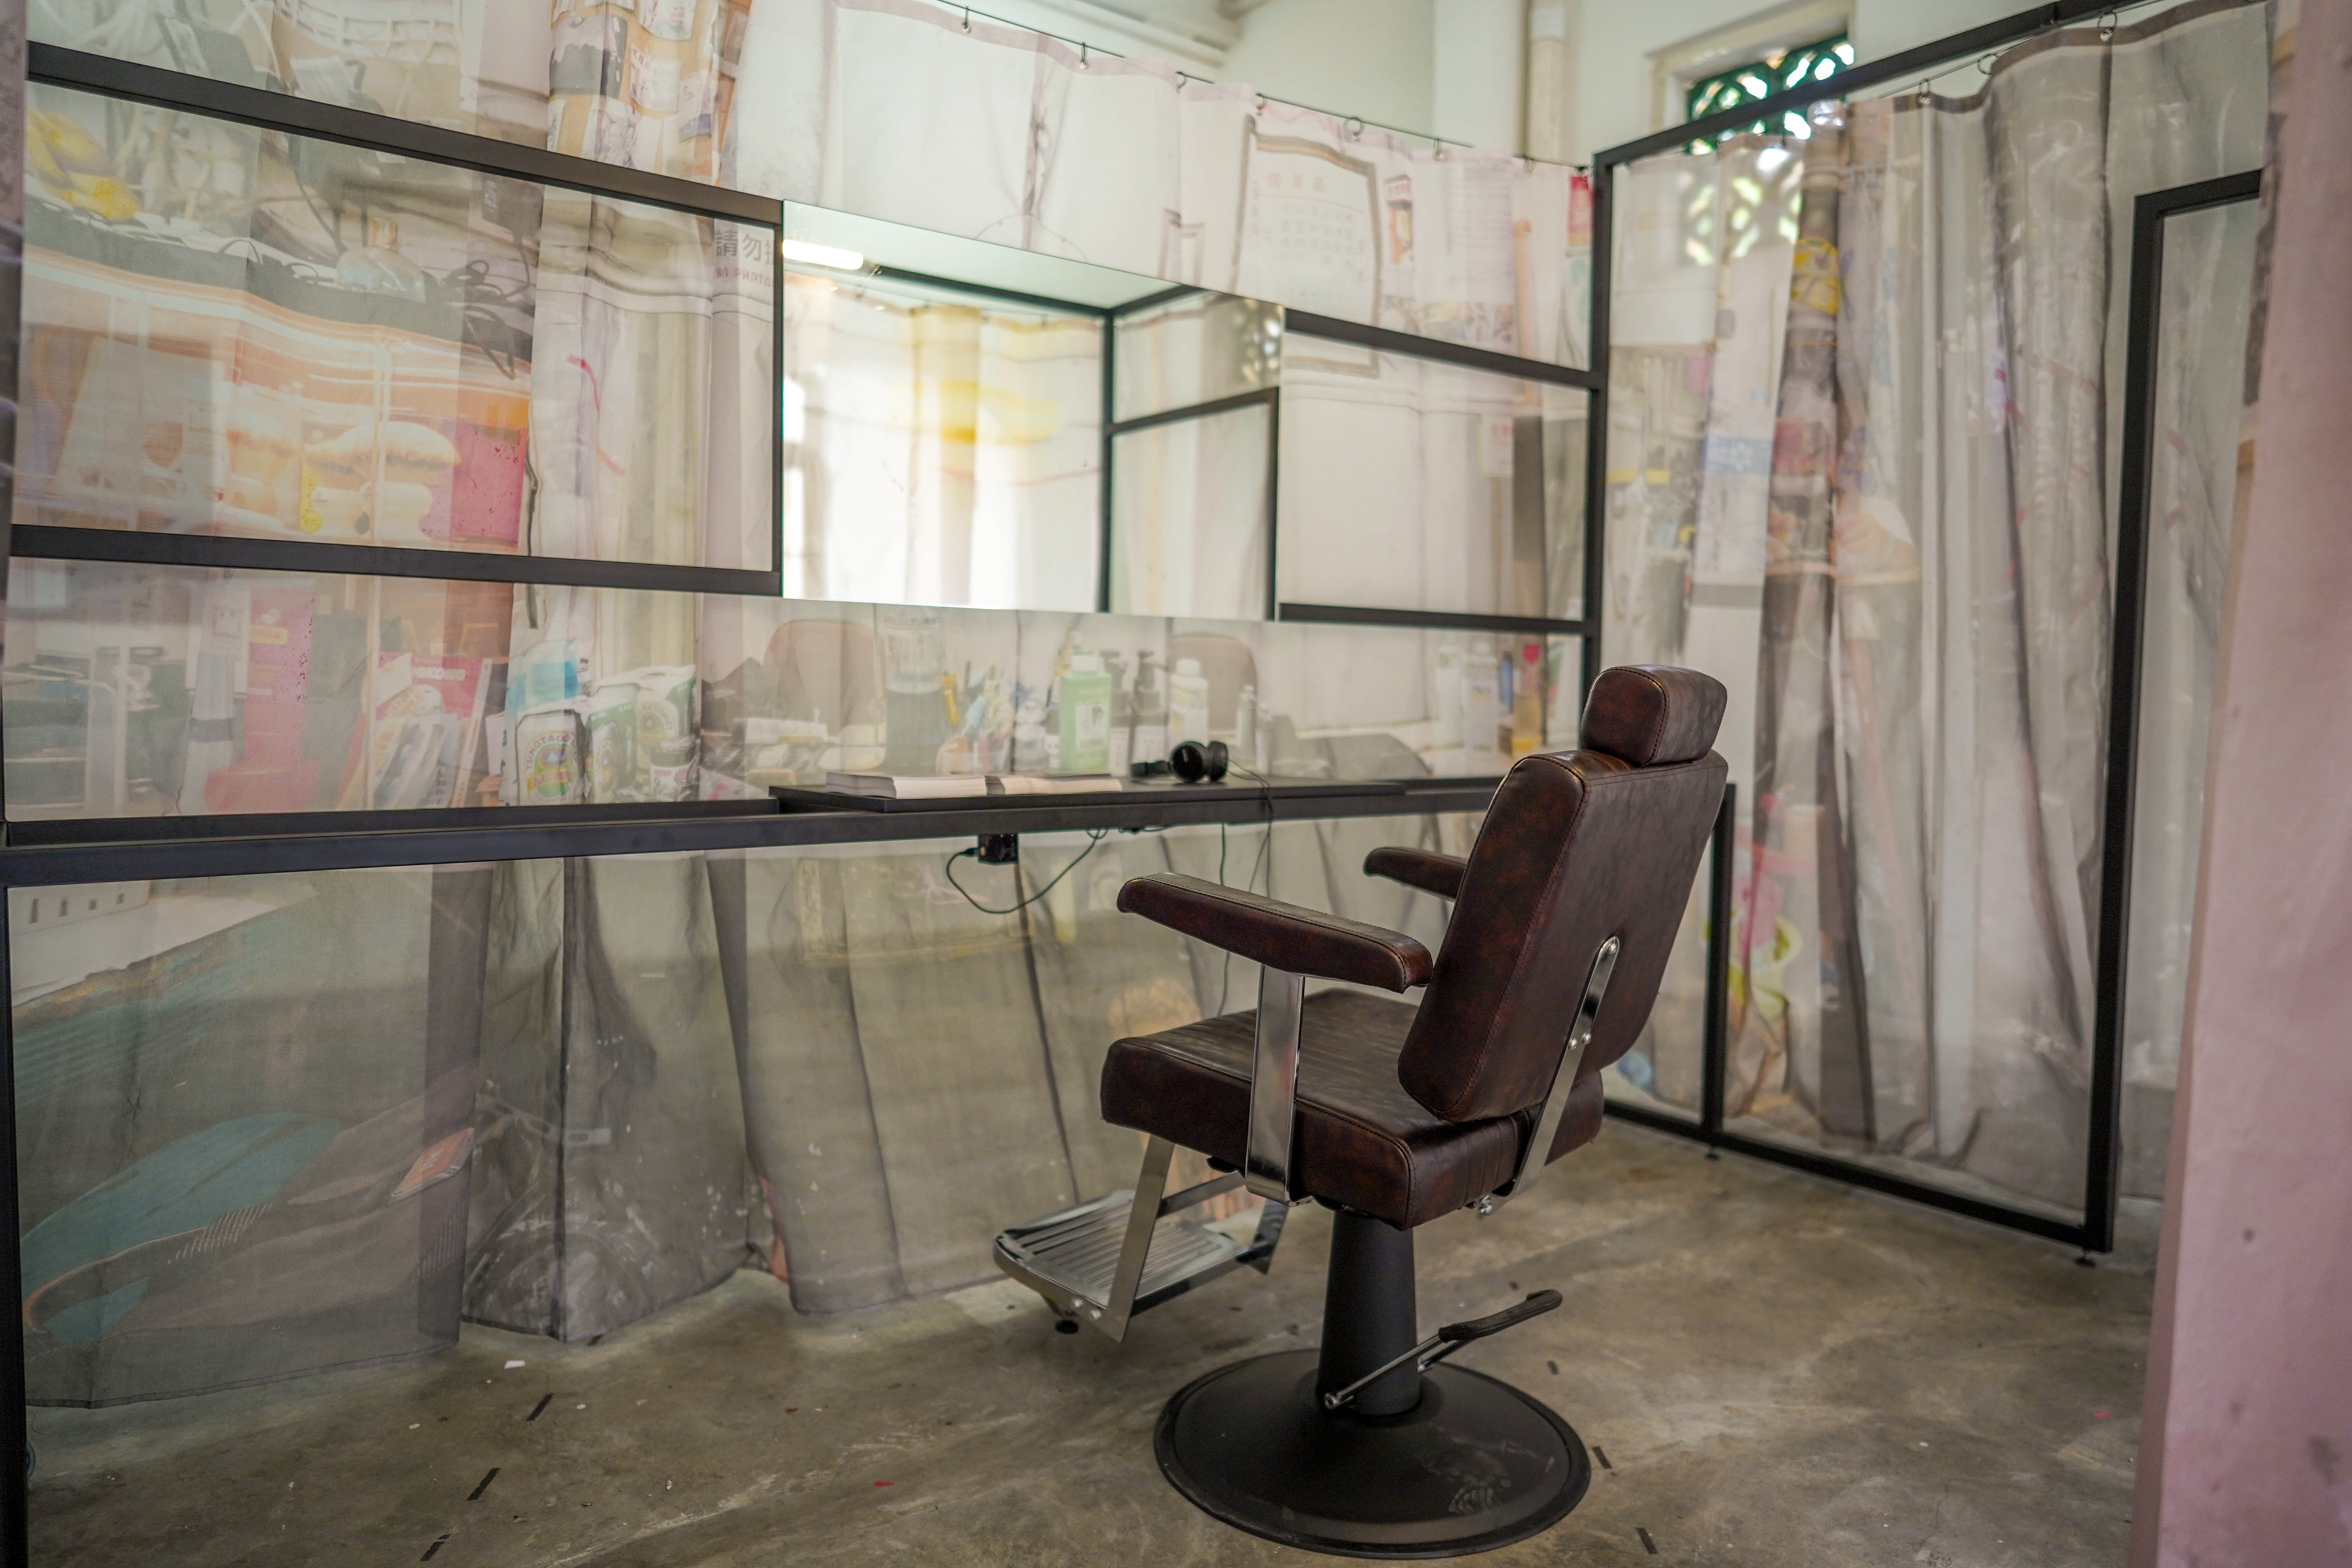 Ivan Wong - In-between Architects - Roving Barbershop, an Art Installation